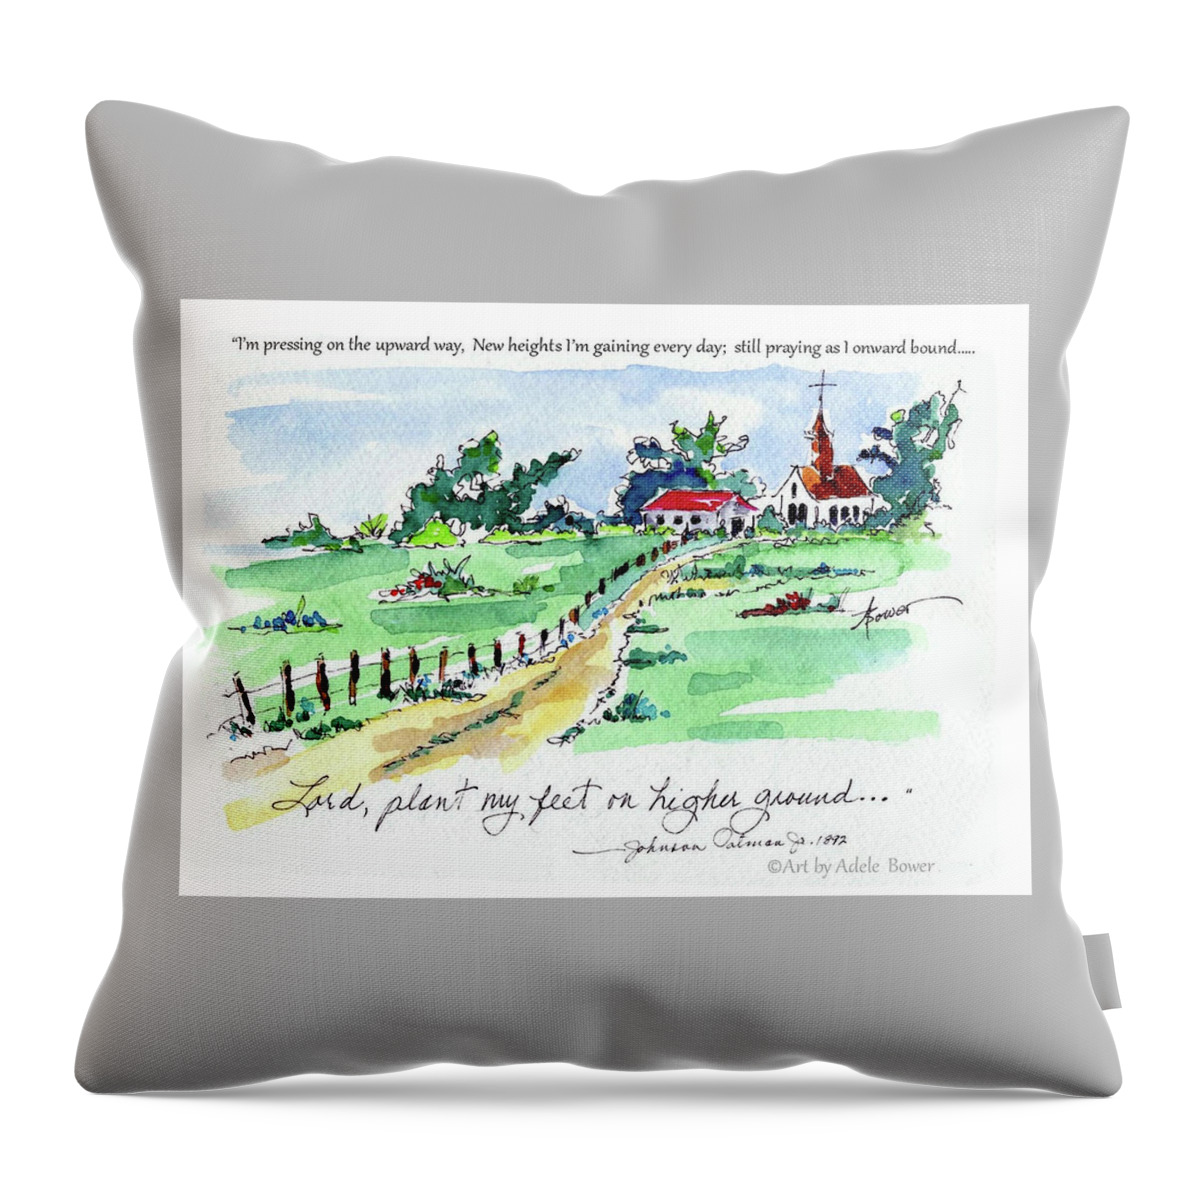 Christian Throw Pillow featuring the painting Higher Ground by Adele Bower